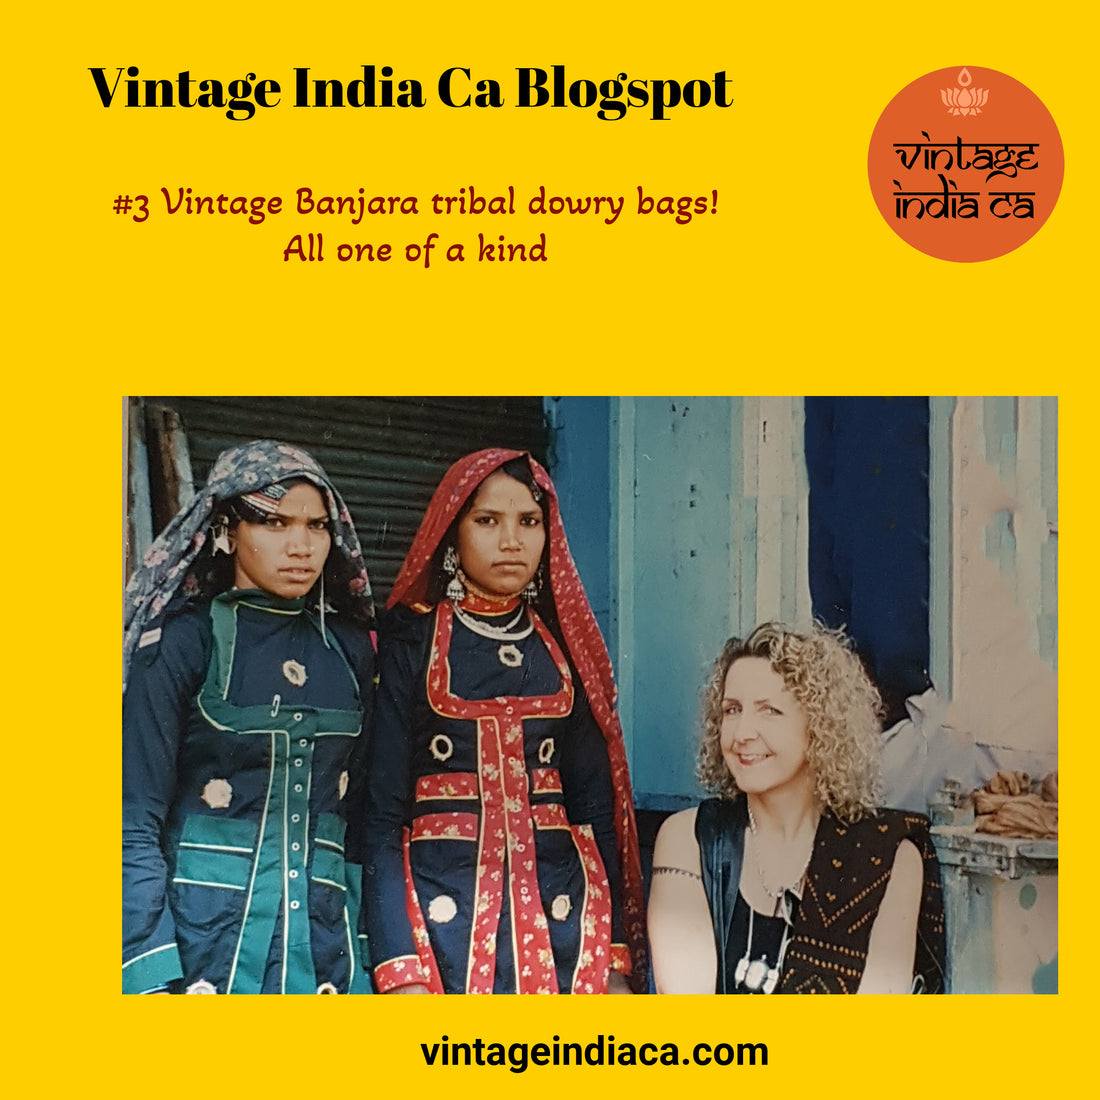 Vintage Banjara tribal dowry bags-all one of a kind!